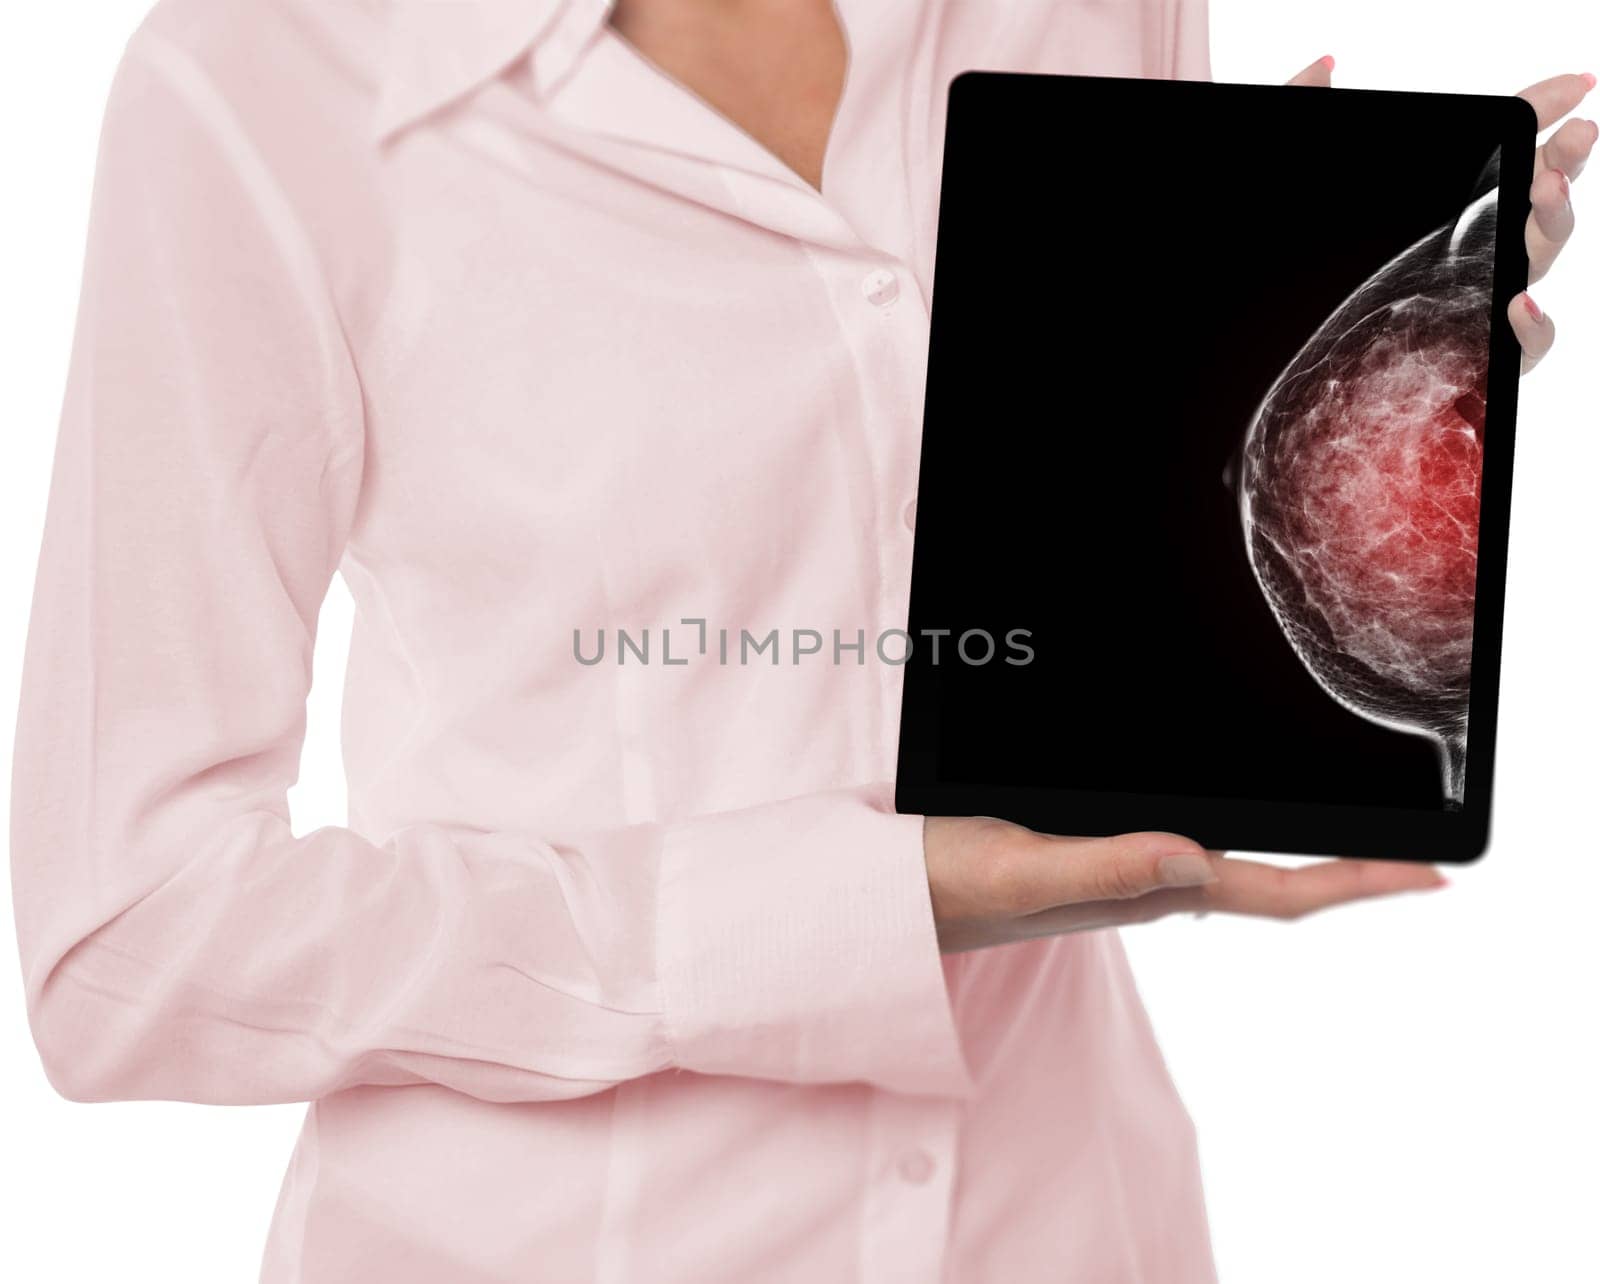 The doctor using digital tablet against X-ray Digital Mammogram isolated on white background.